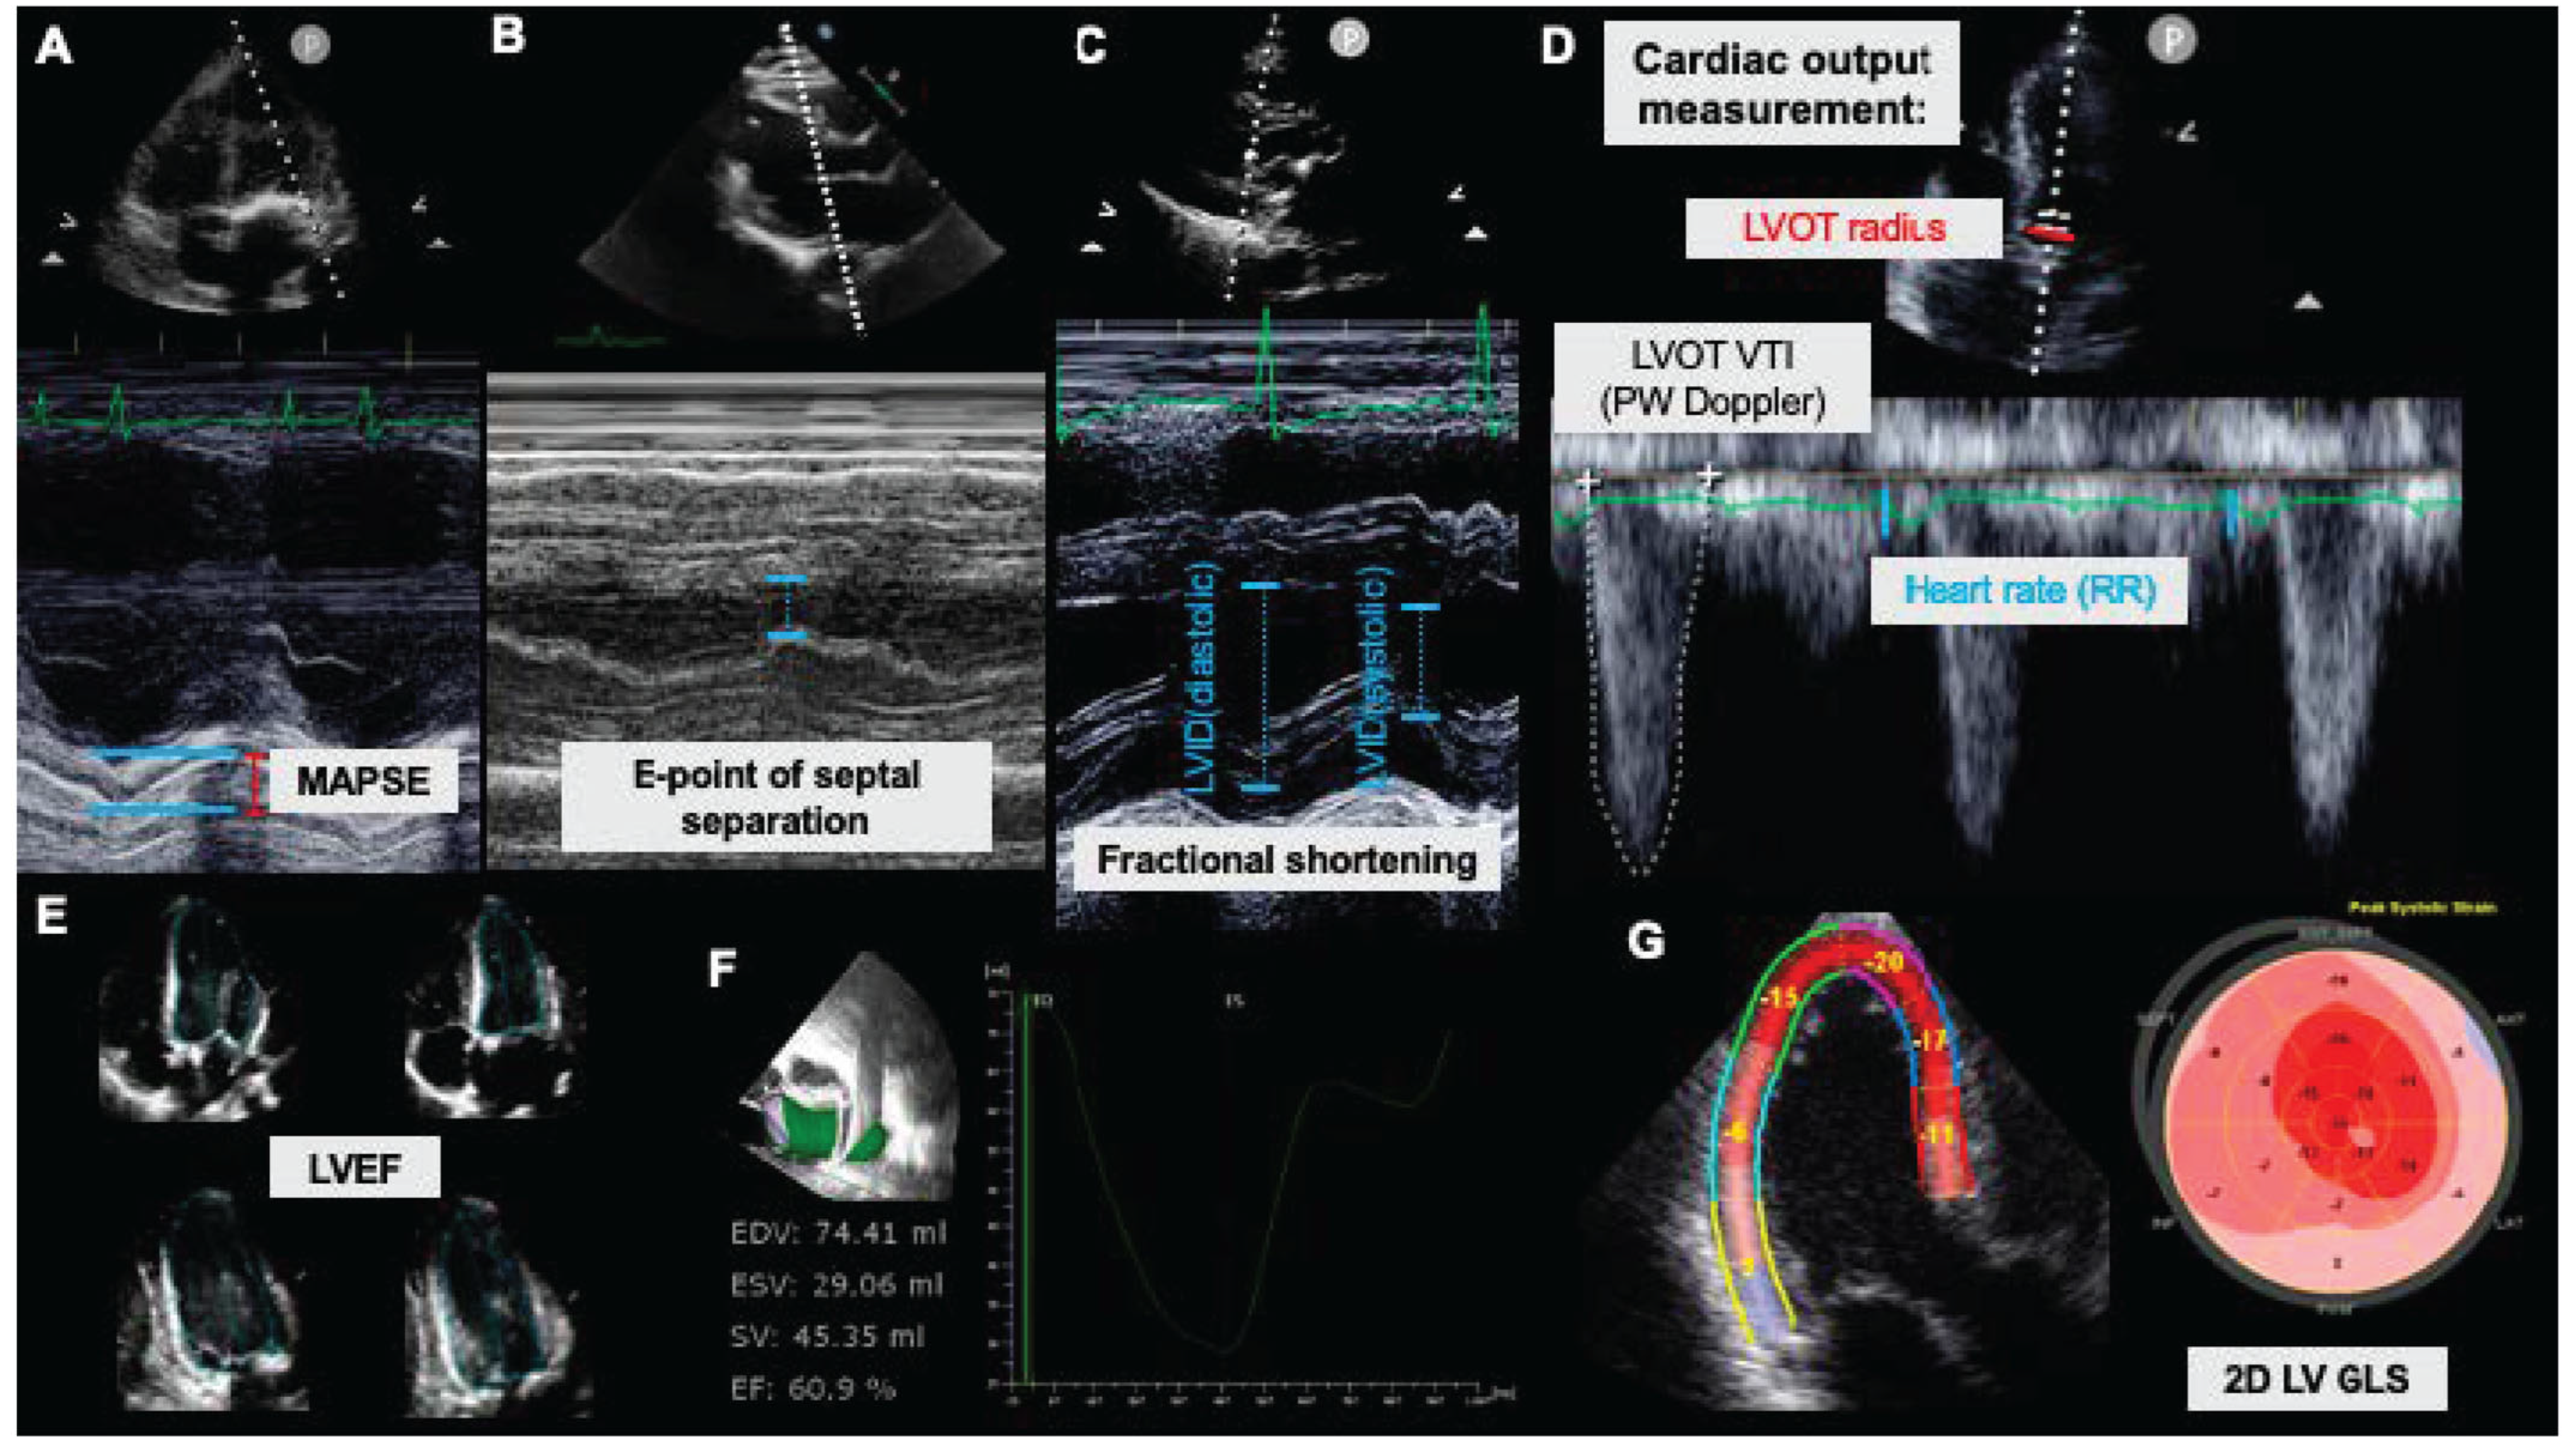 Analysis of myocardial strain of the left ventricle based on 2-D